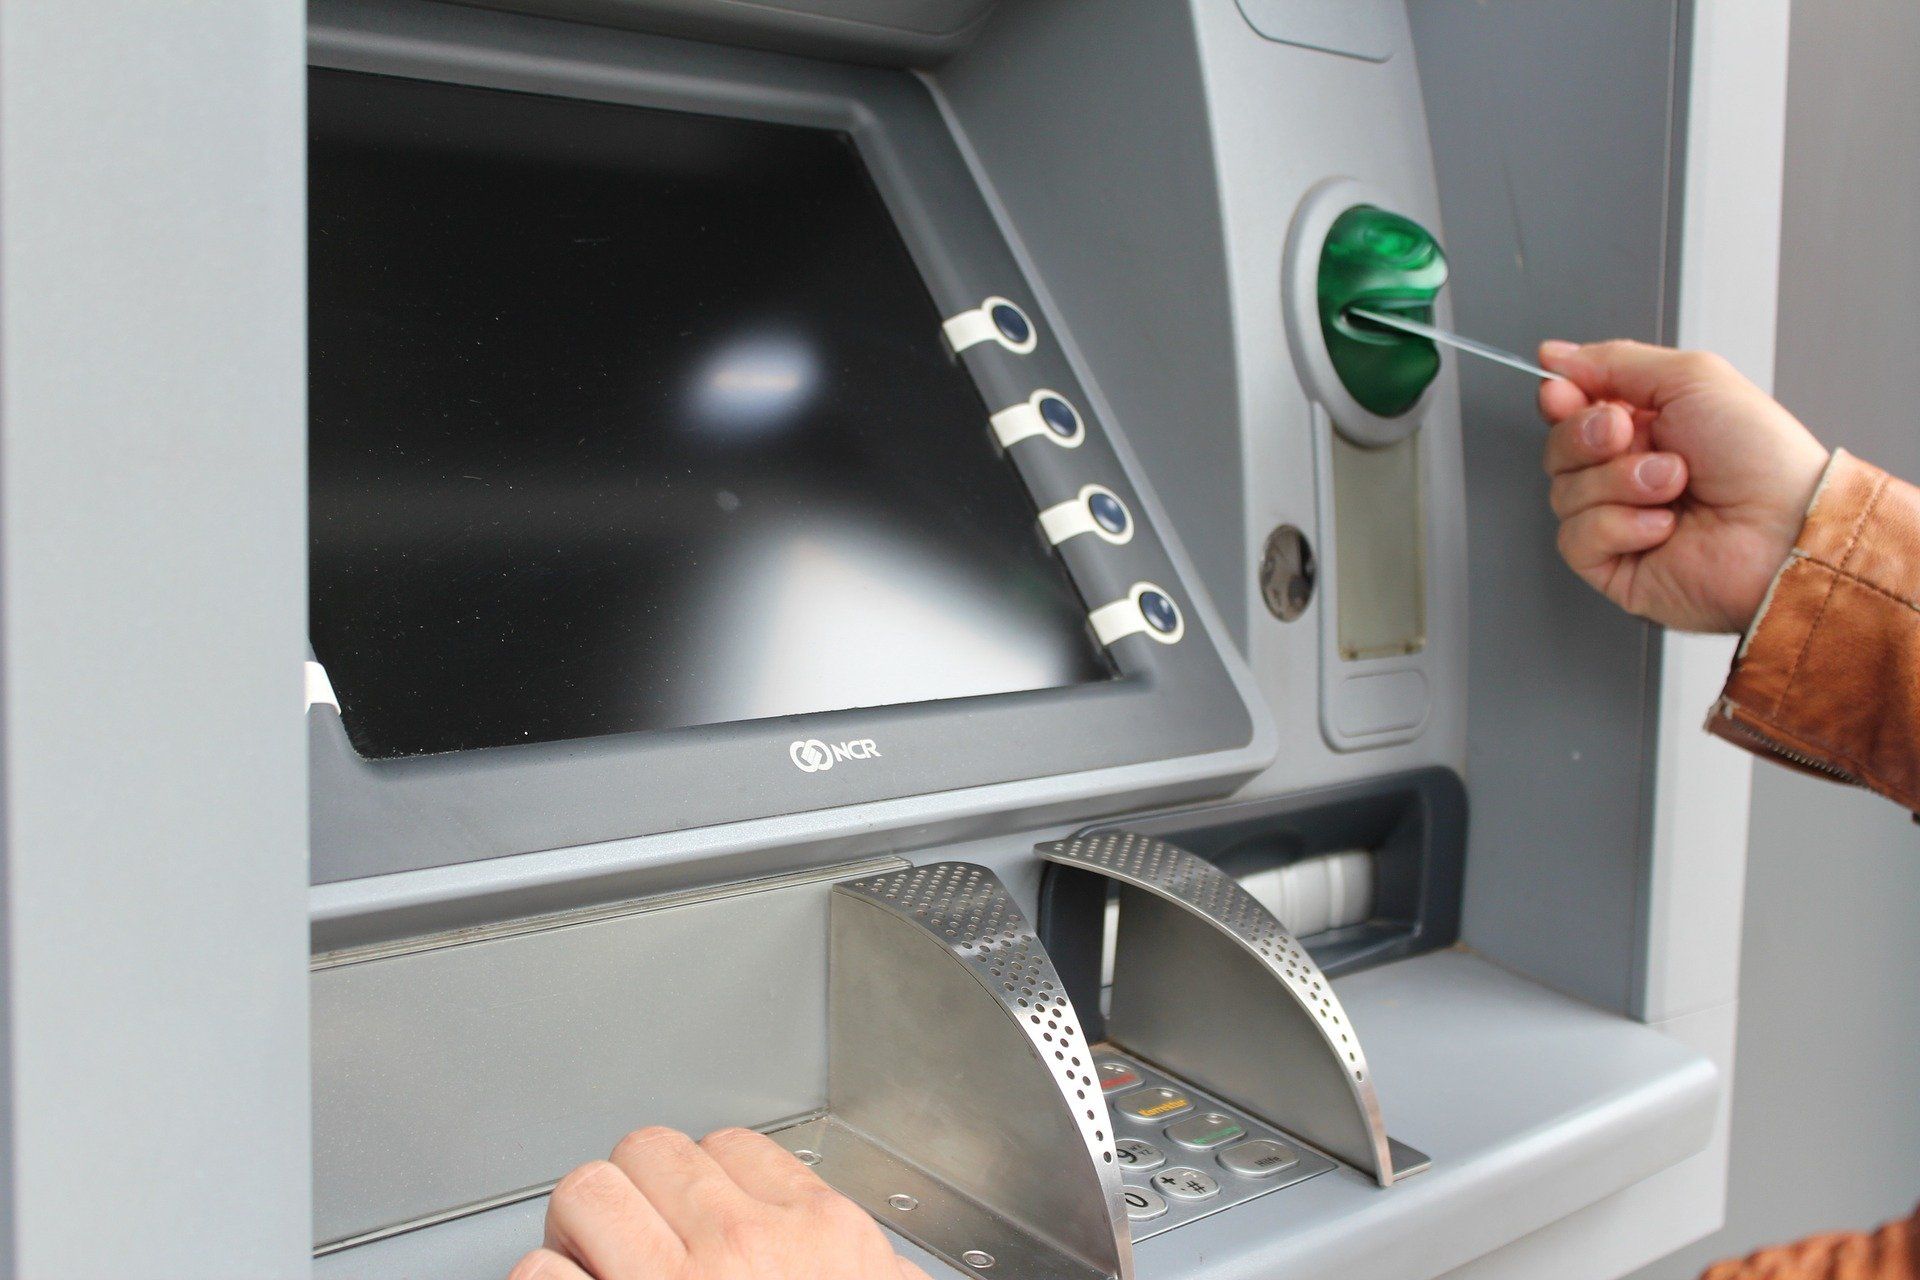 Putting Bank Card in ATM